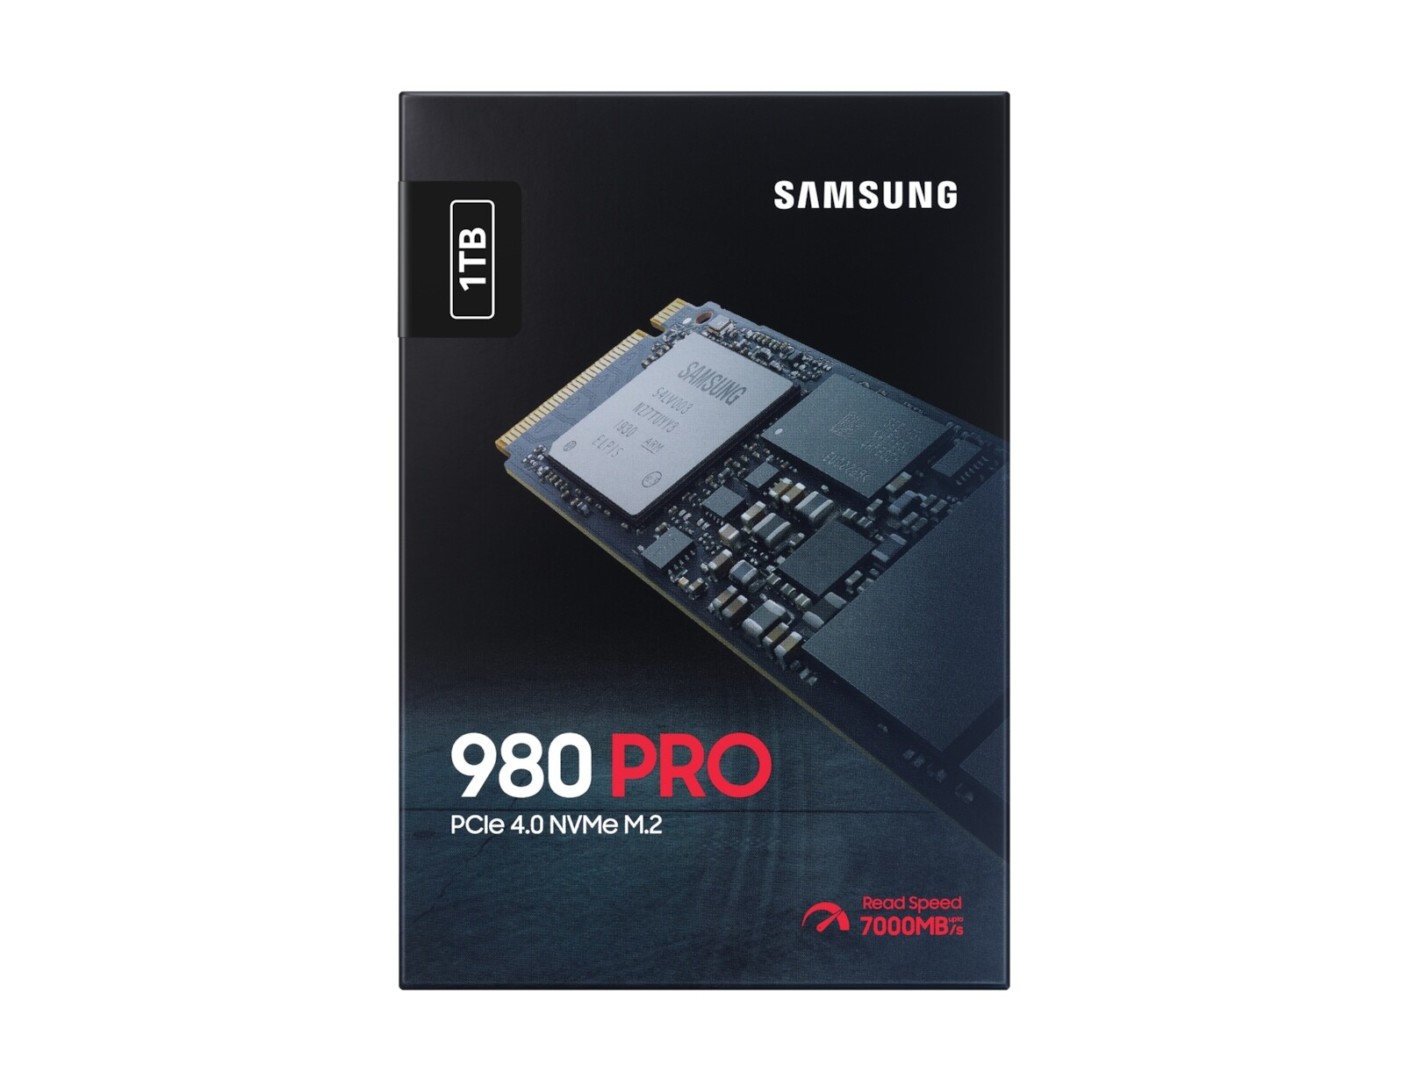 snatch den første chap Samsung 980 PRO SSD possibly leaked, features 7k MB/s read speed